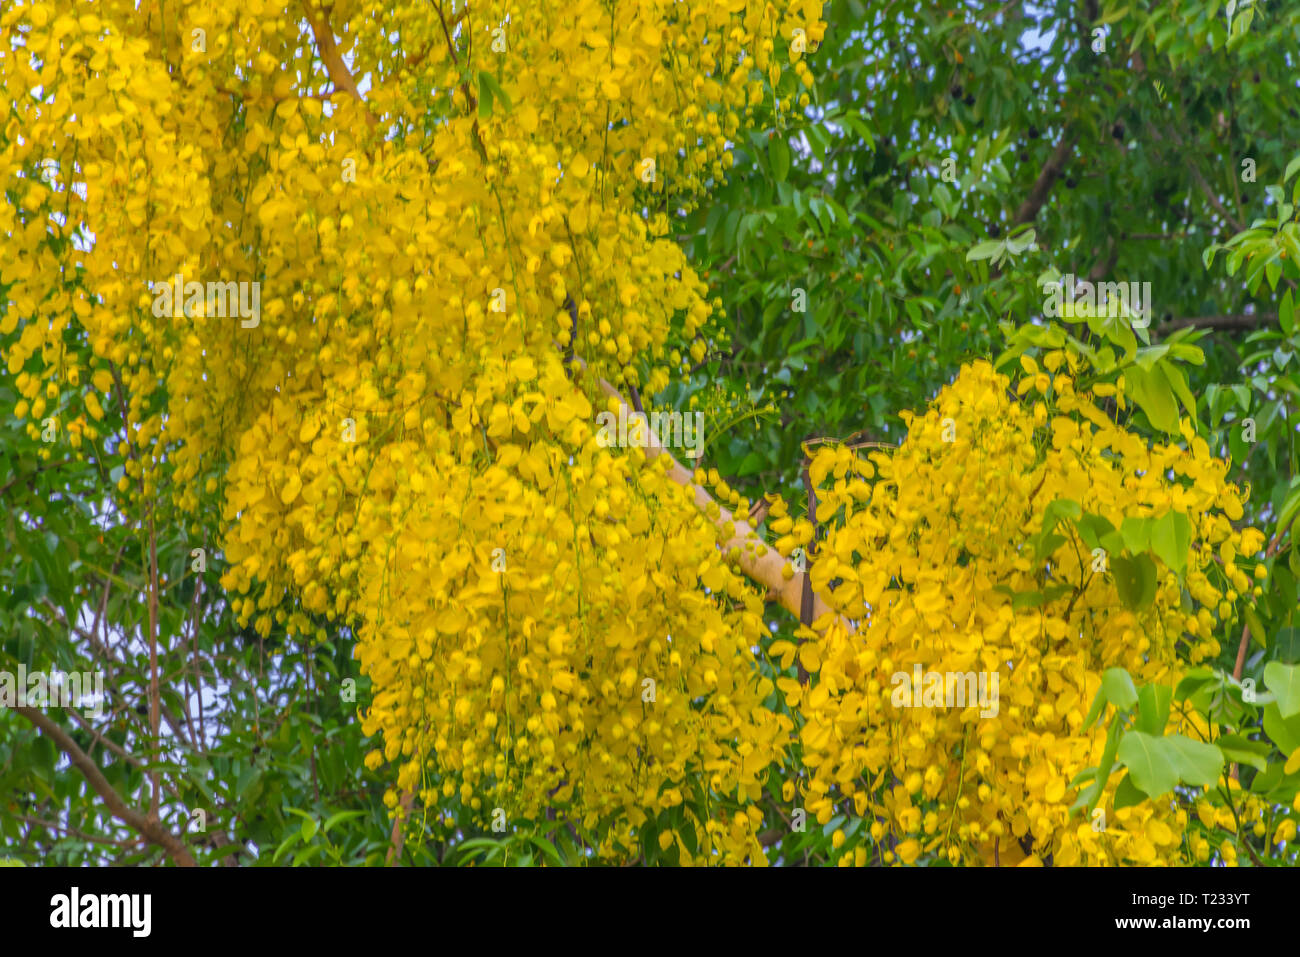 Soft blurred and soft focus texture of Golden shower, Cassia fistula ( Fabaceae ) flower blossom.Thailand's national flower. Stock Photo